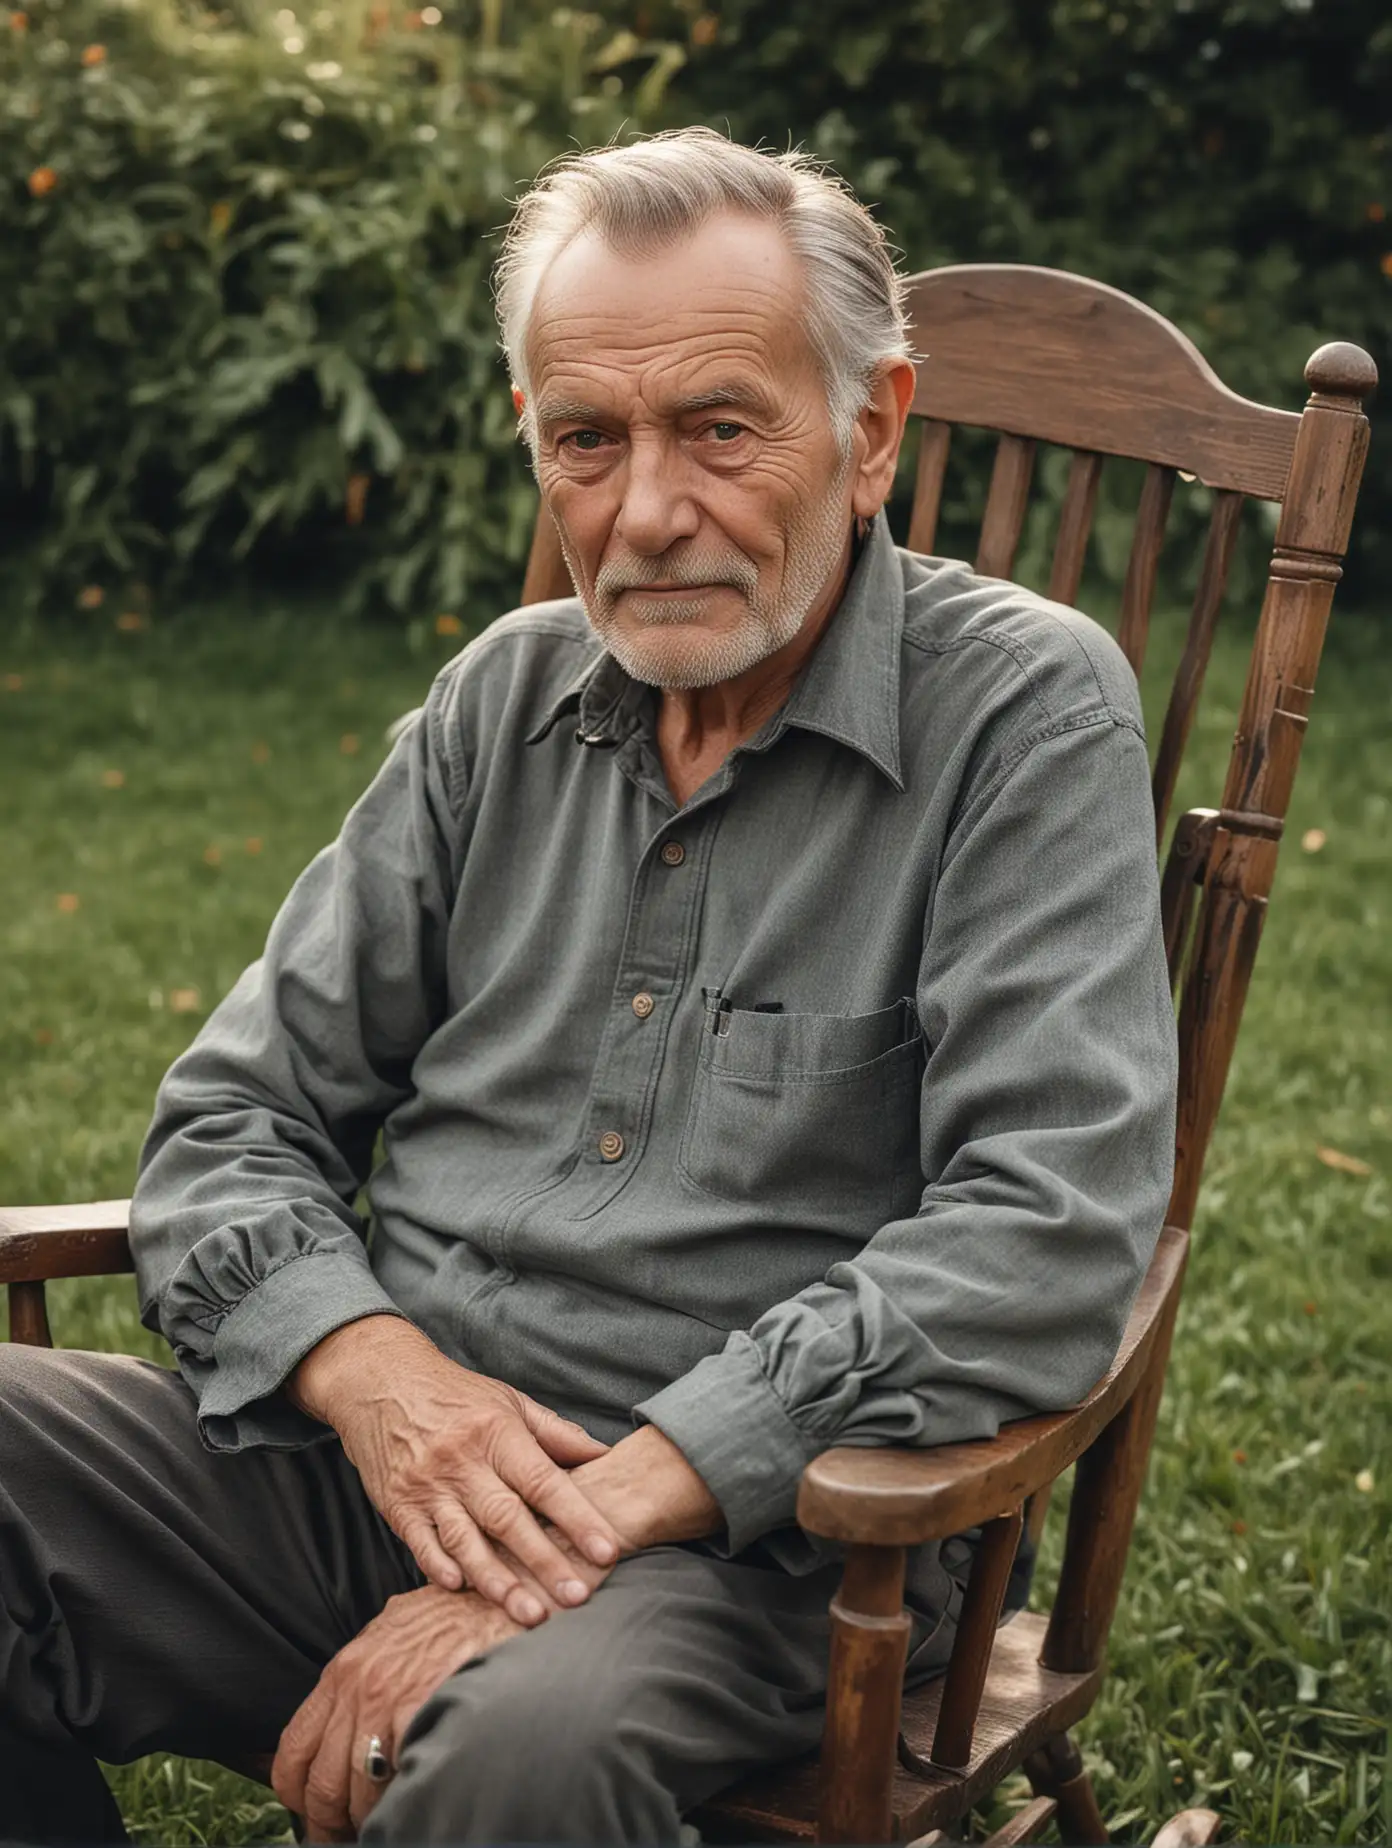 A 70-year-old man, sitting in a rocking chair on the grass, facing the camera, with exquisite facial features and professional photography skills